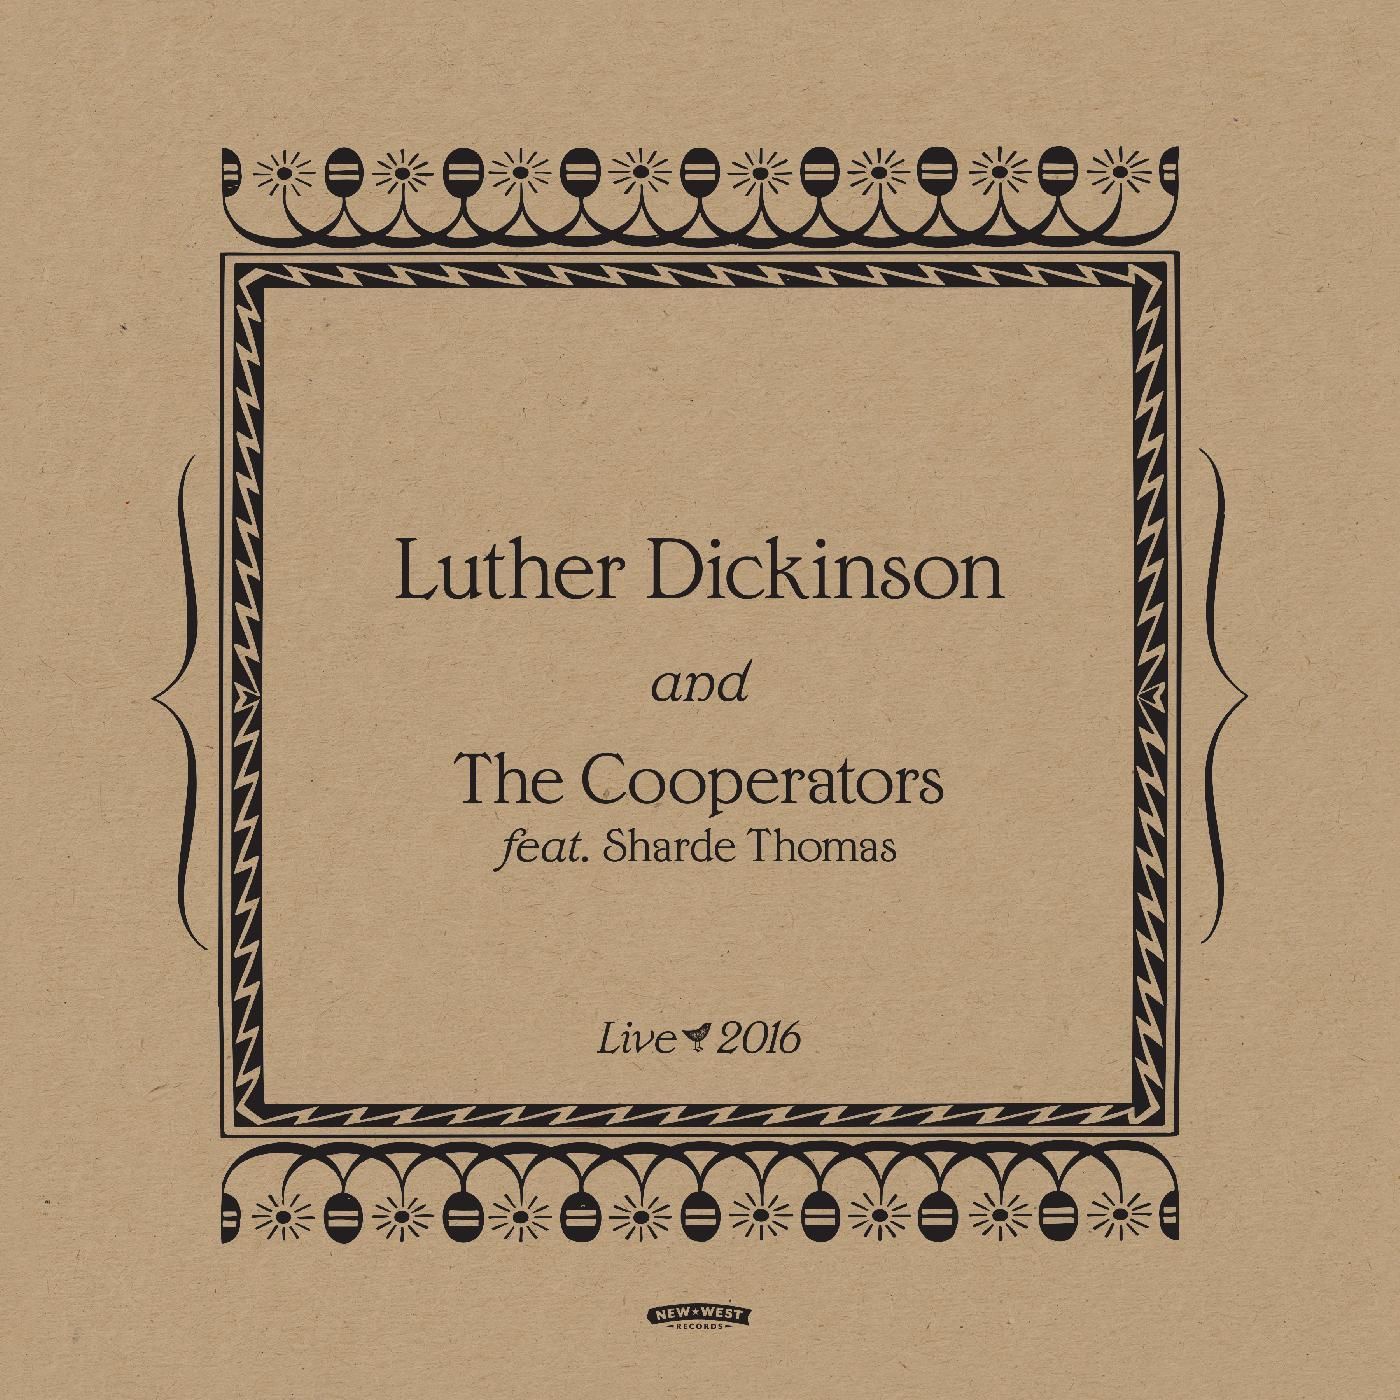 Luther Dickinson and The Cooperators – Live 2016 (2020) [FLAC 24bit/96kHz]